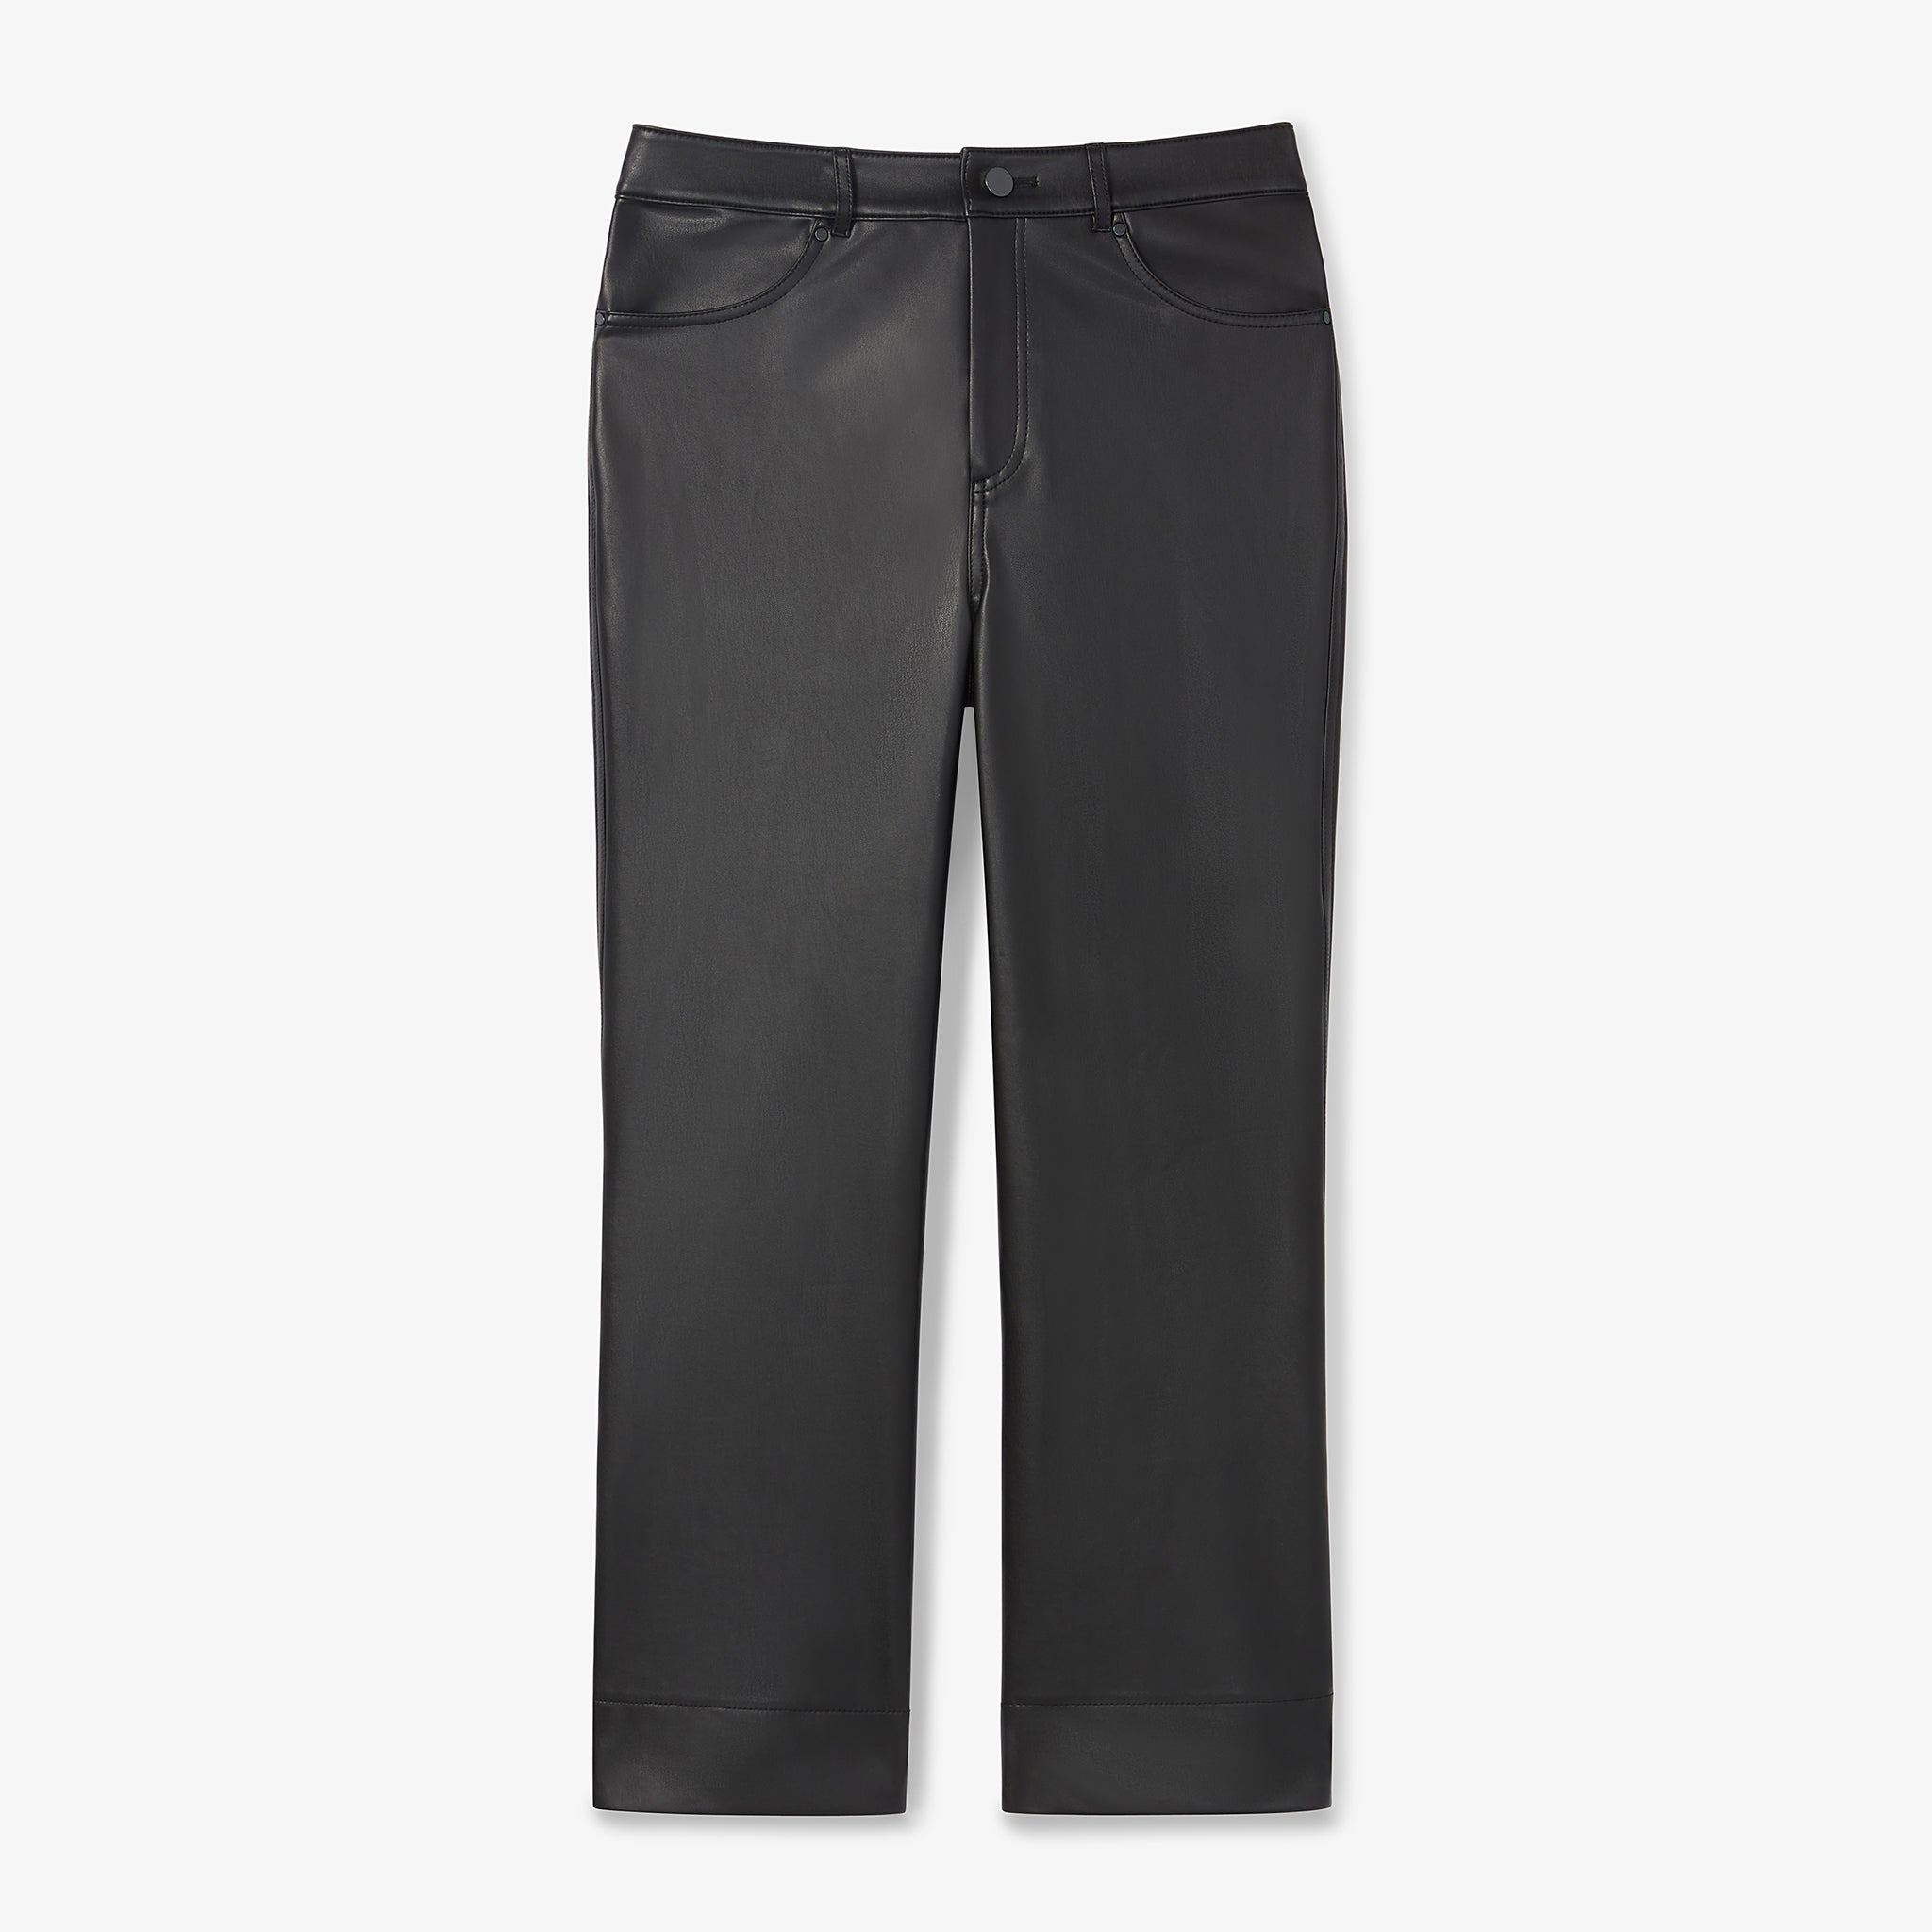 Packshot image of the archie pant in black